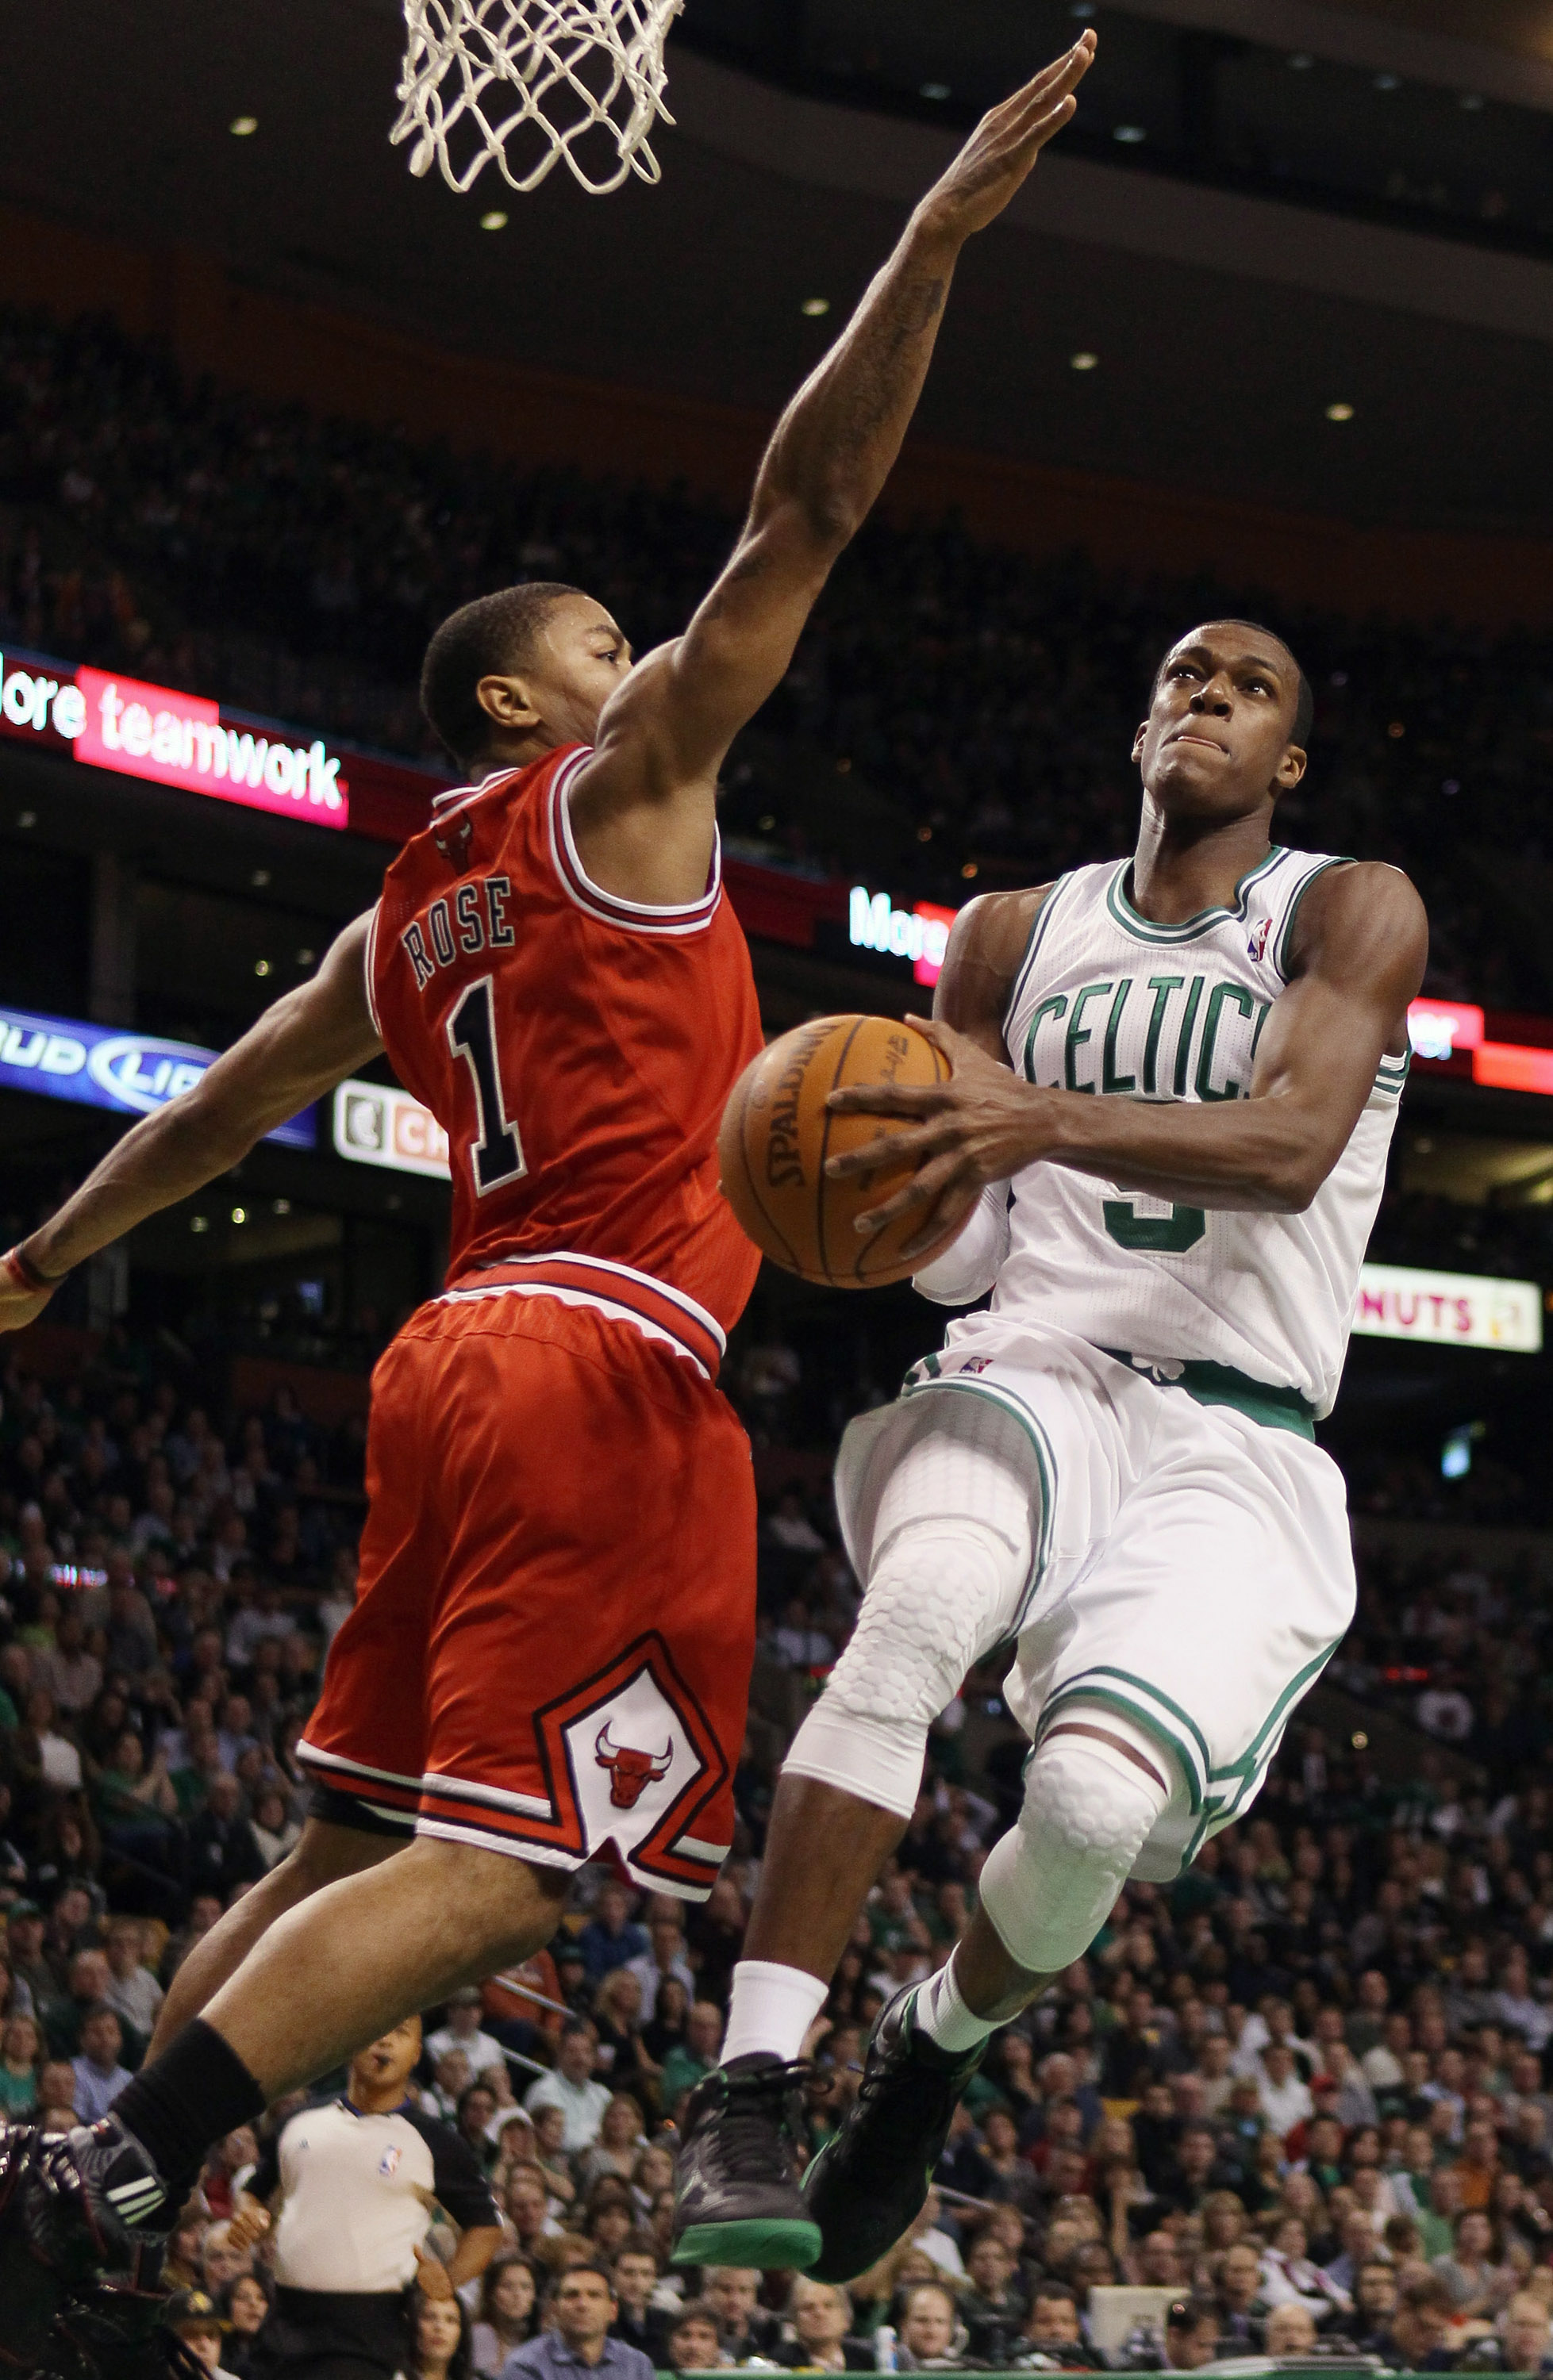 BOSTON, MA - NOVEMBER 05:  Rajon Rondo #9 of the Boston Celtics takes a shot as Derrick Rose #1 of the Chicago Bulls defends on November 5, 2010 at the TD Garden in Boston, Massachusetts.  NOTE TO USER: User expressly acknowledges and agrees that, by down